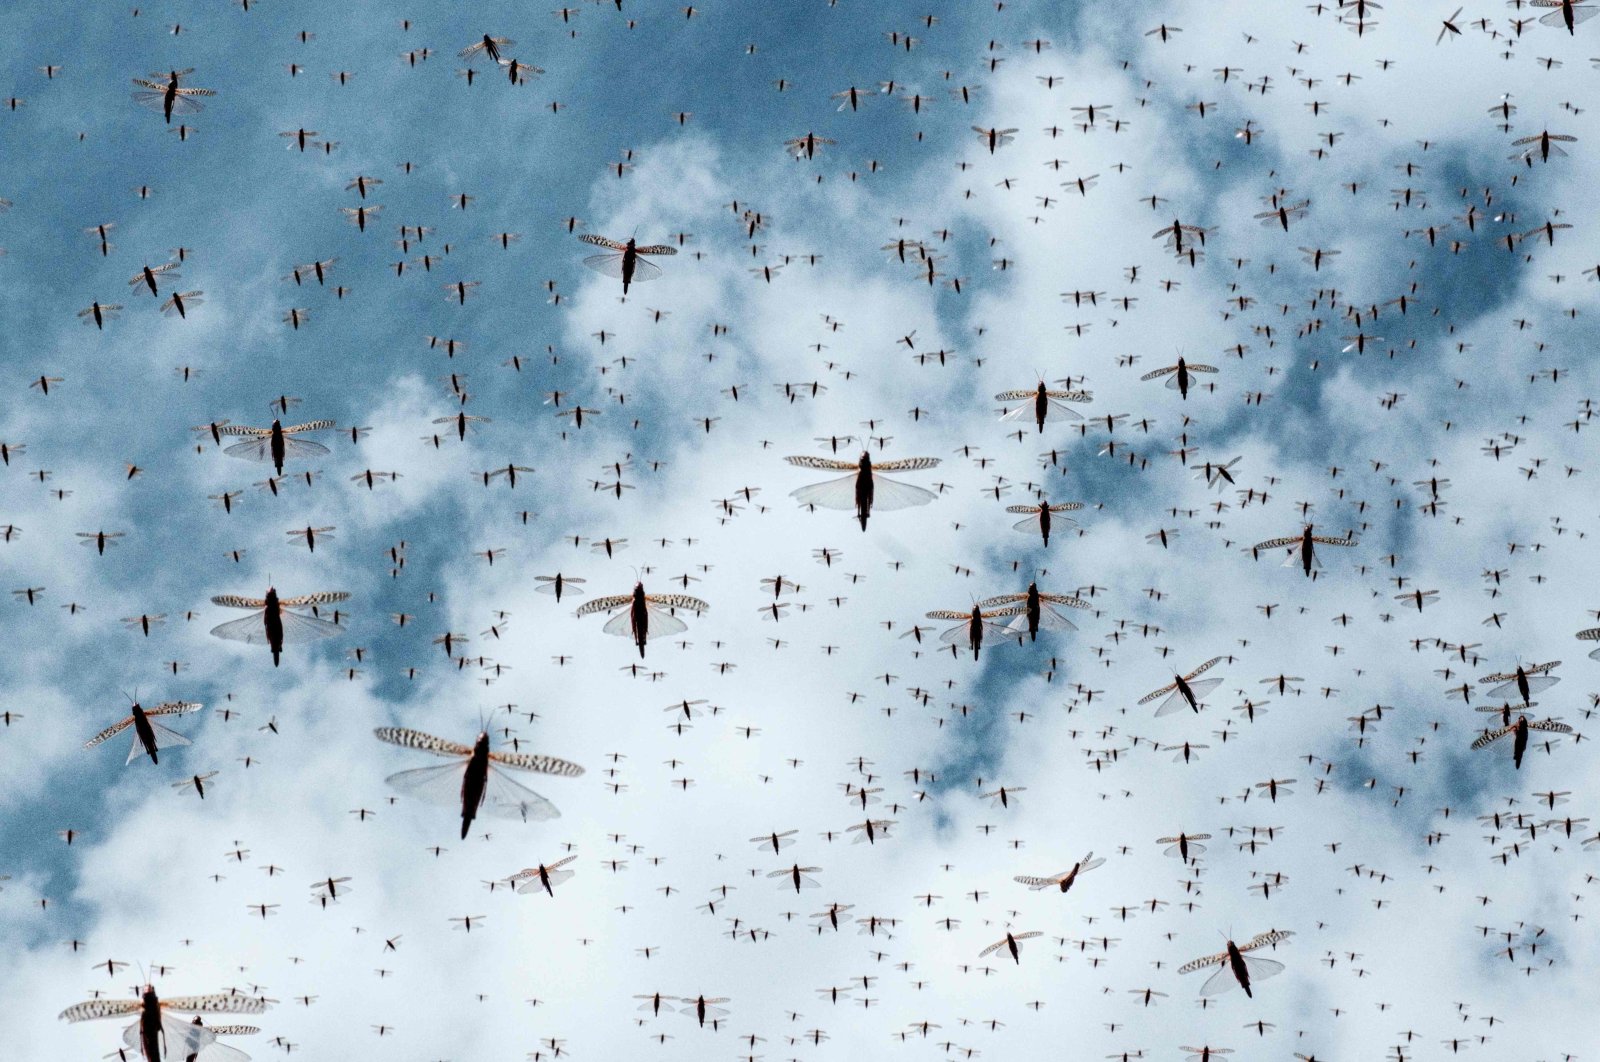 A picture taken on February 9, 2021, shows a swarm of desert locusts flying after an aircraft sprayed pesticide in Meru, Kenya. (AFP Photo)